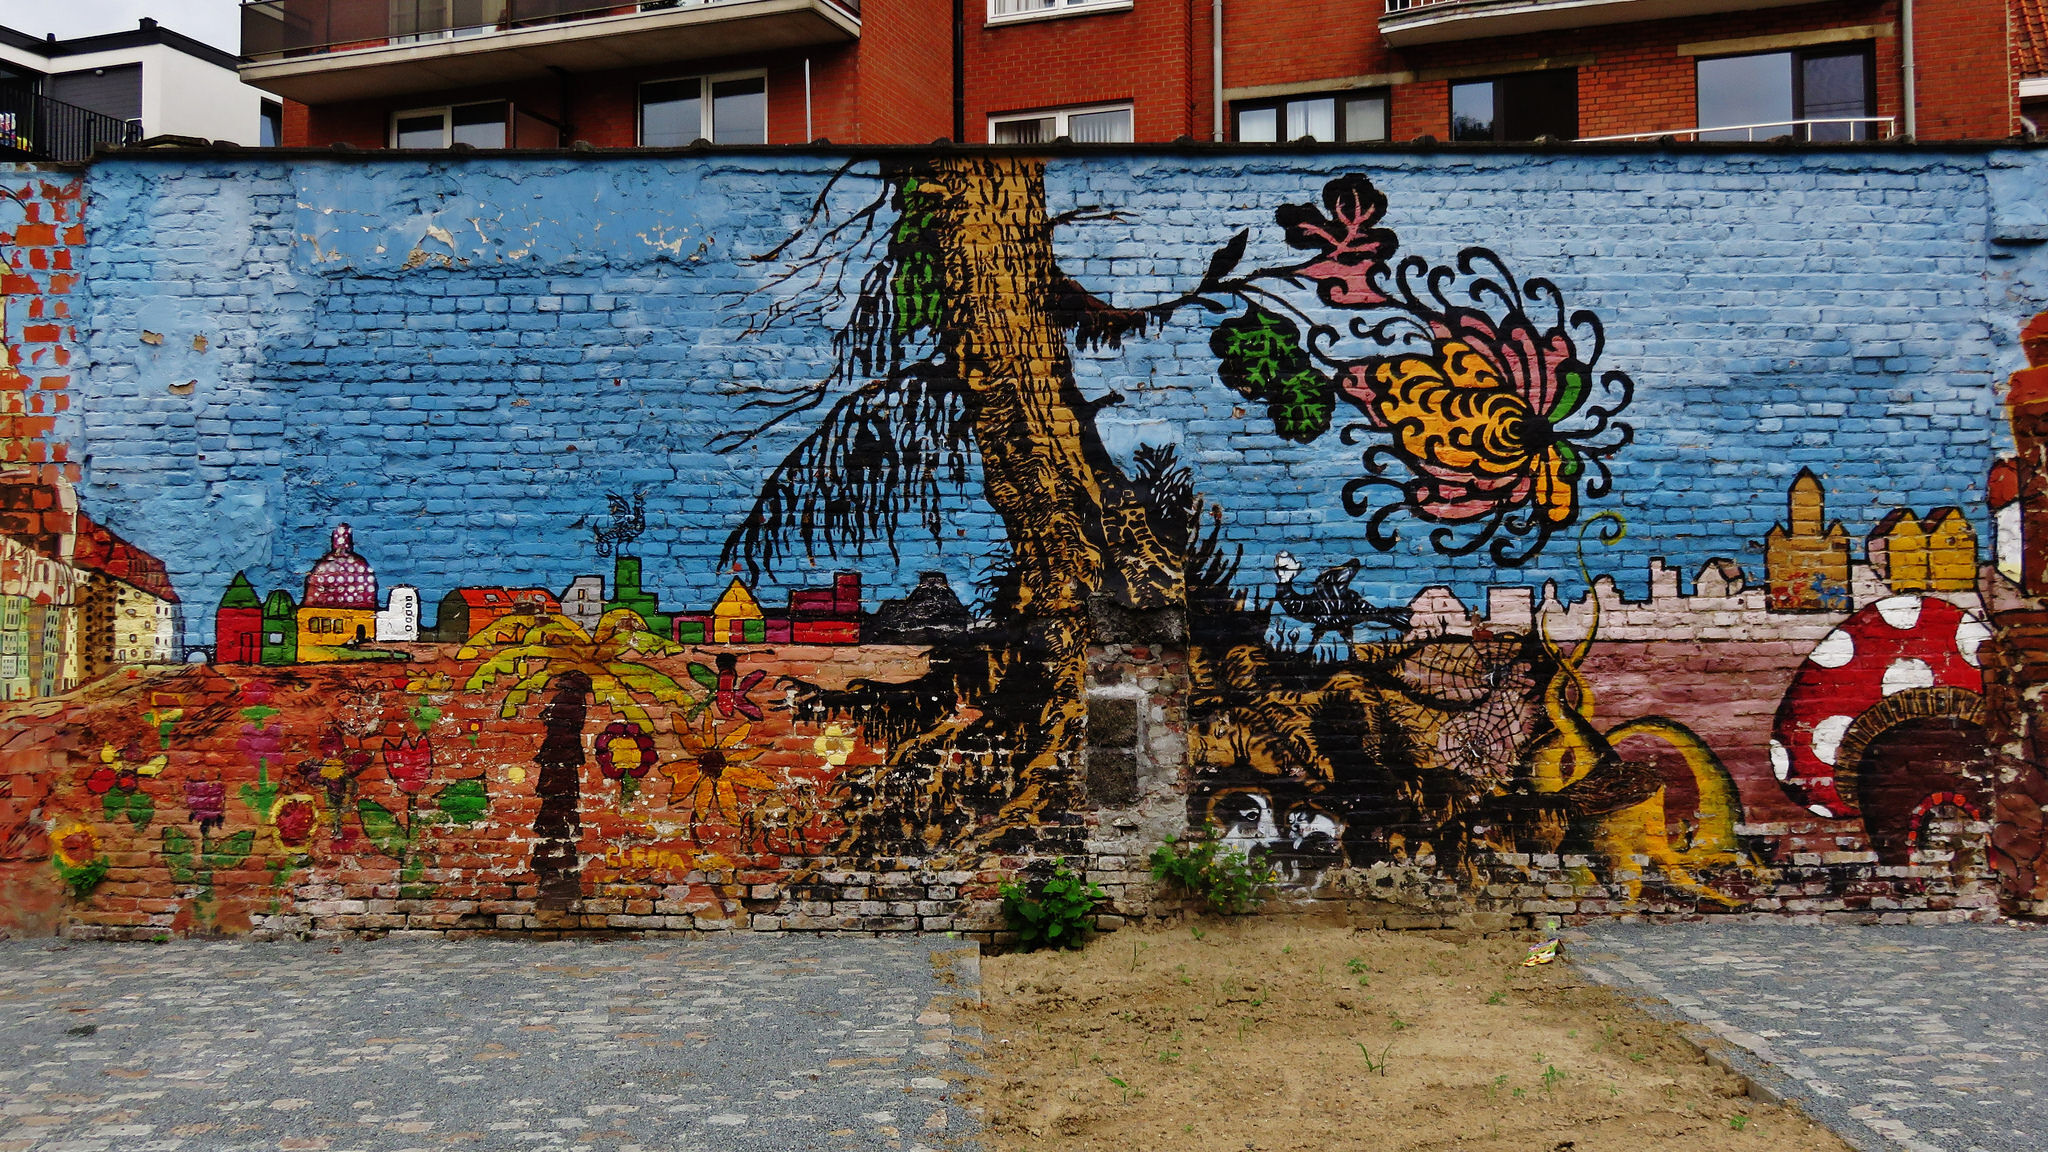 Chase, Bué The Warrior, Unknown - Ghent&mdash;Groendreef